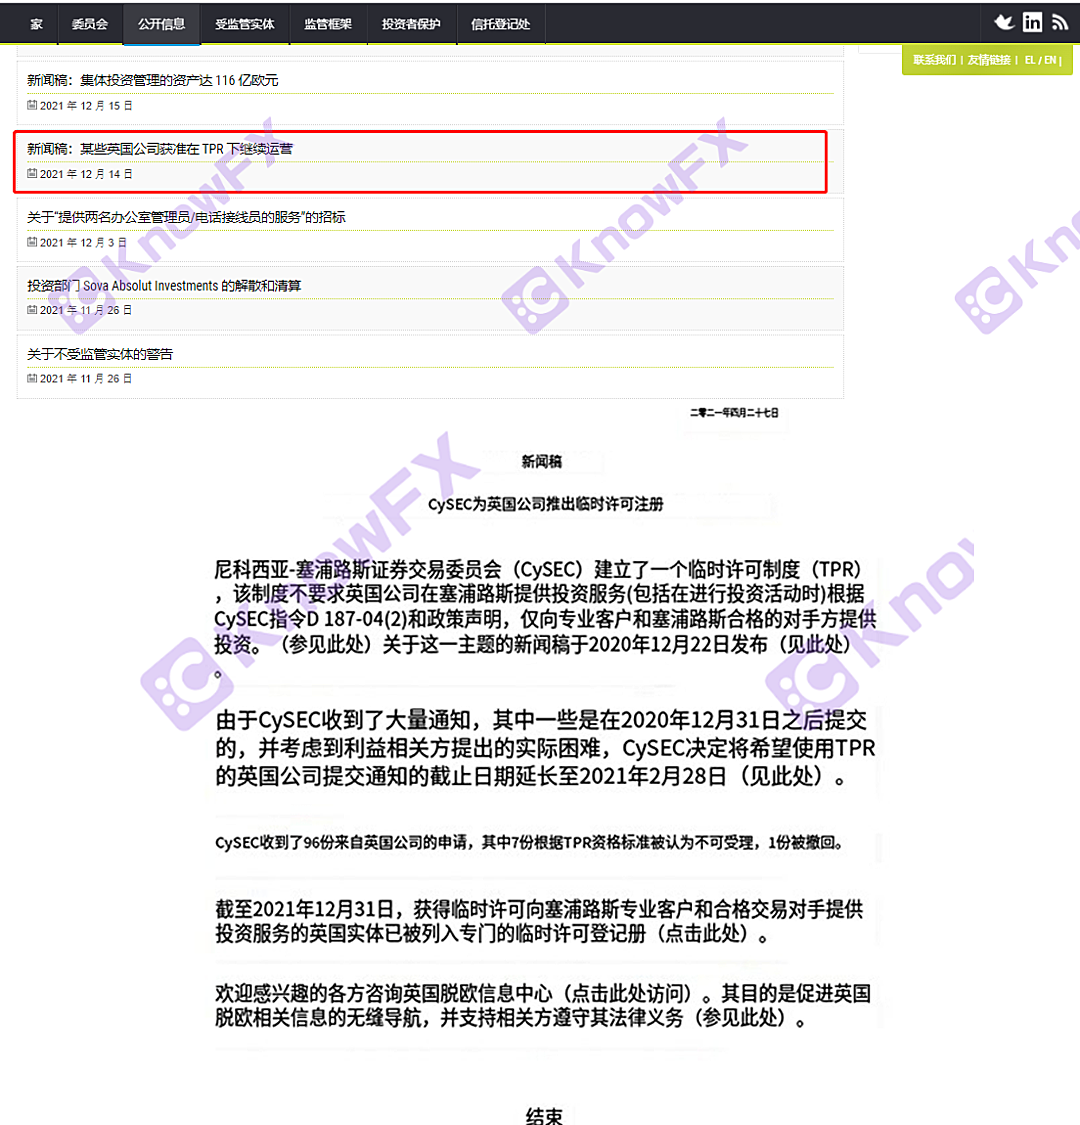 Shock!IntersectionRoboMarkets uses expiration licenses for transactions, and its parent company Roboforex is also a guest complaint!Intersection-第12张图片-要懂汇圈网